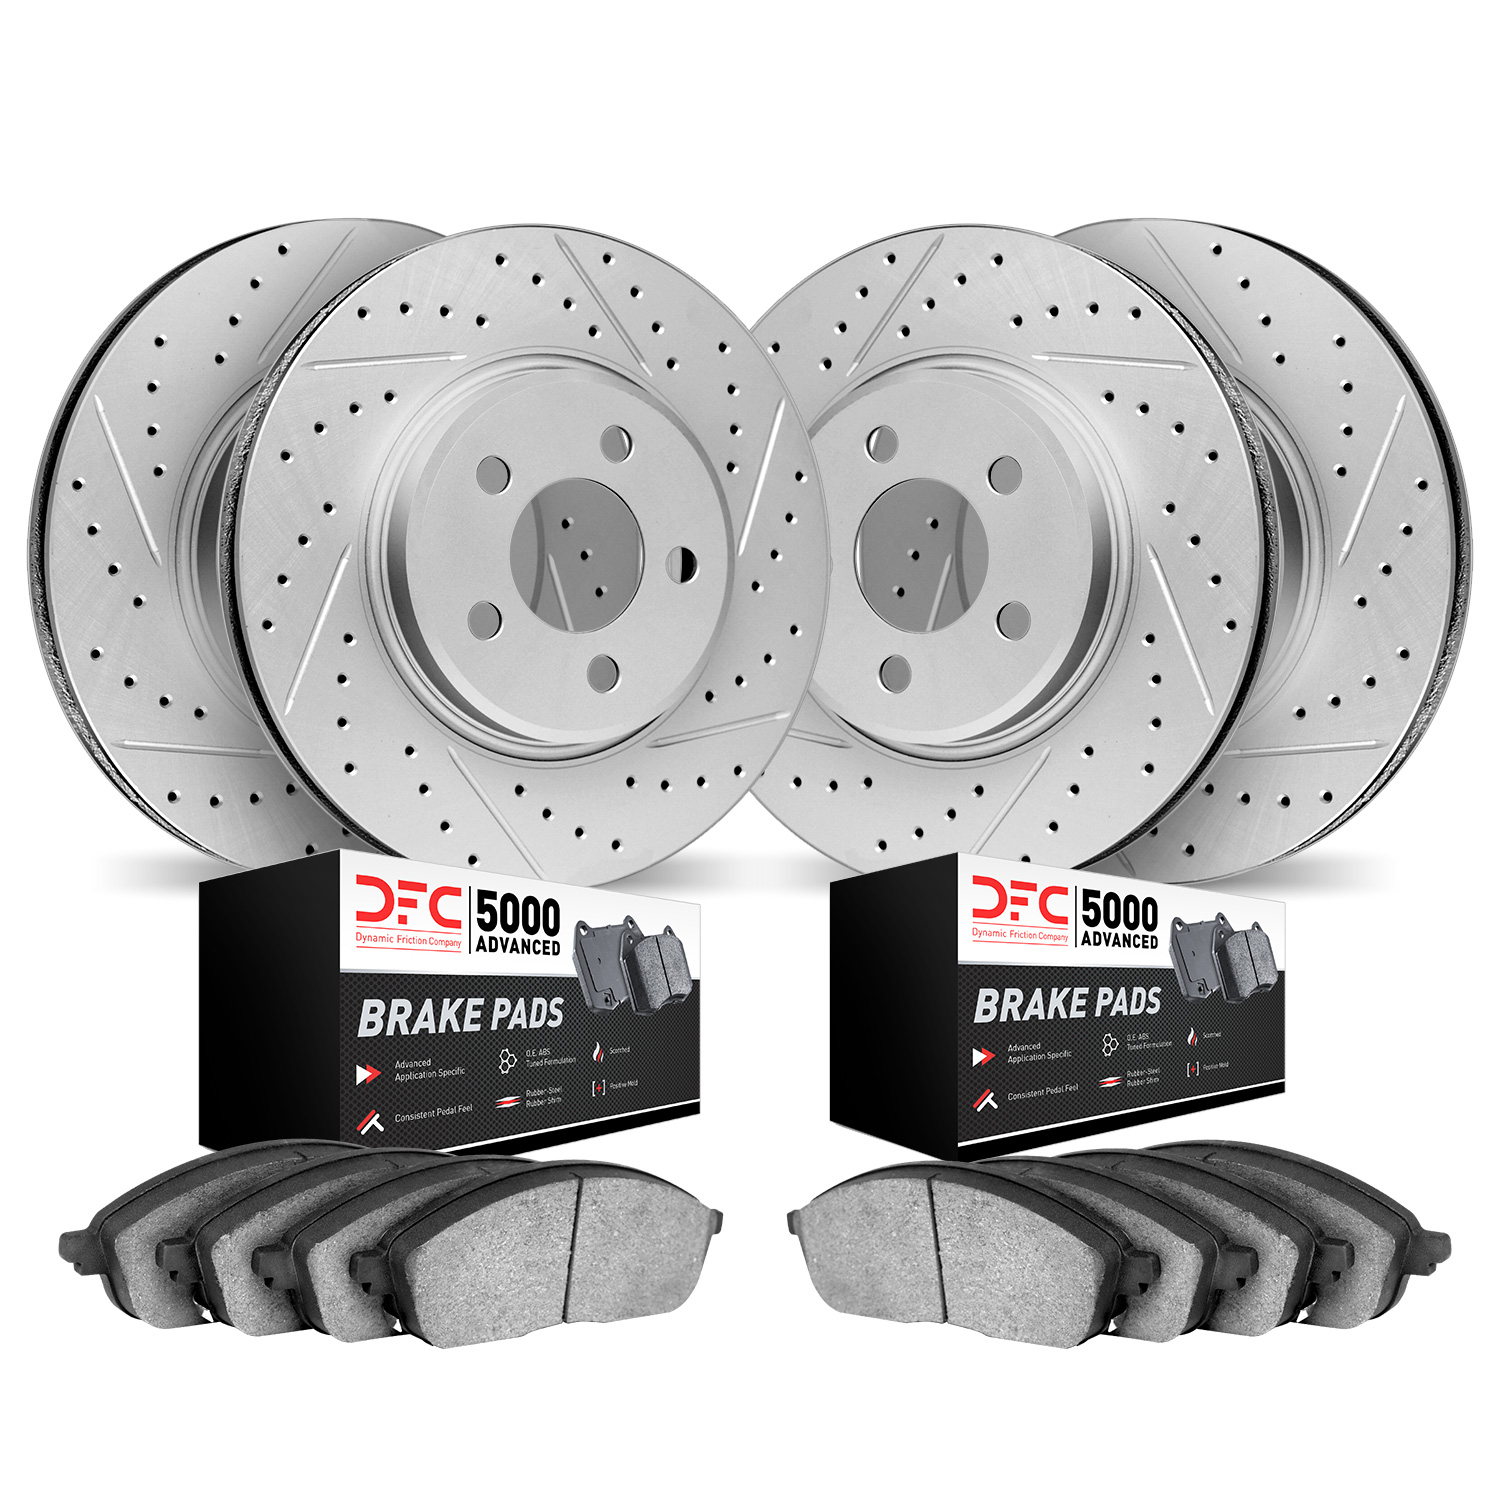 2504-13014 Geoperformance Drilled/Slotted Rotors w/5000 Advanced Brake Pads Kit, 2016-2019 Subaru, Position: Front and Rear